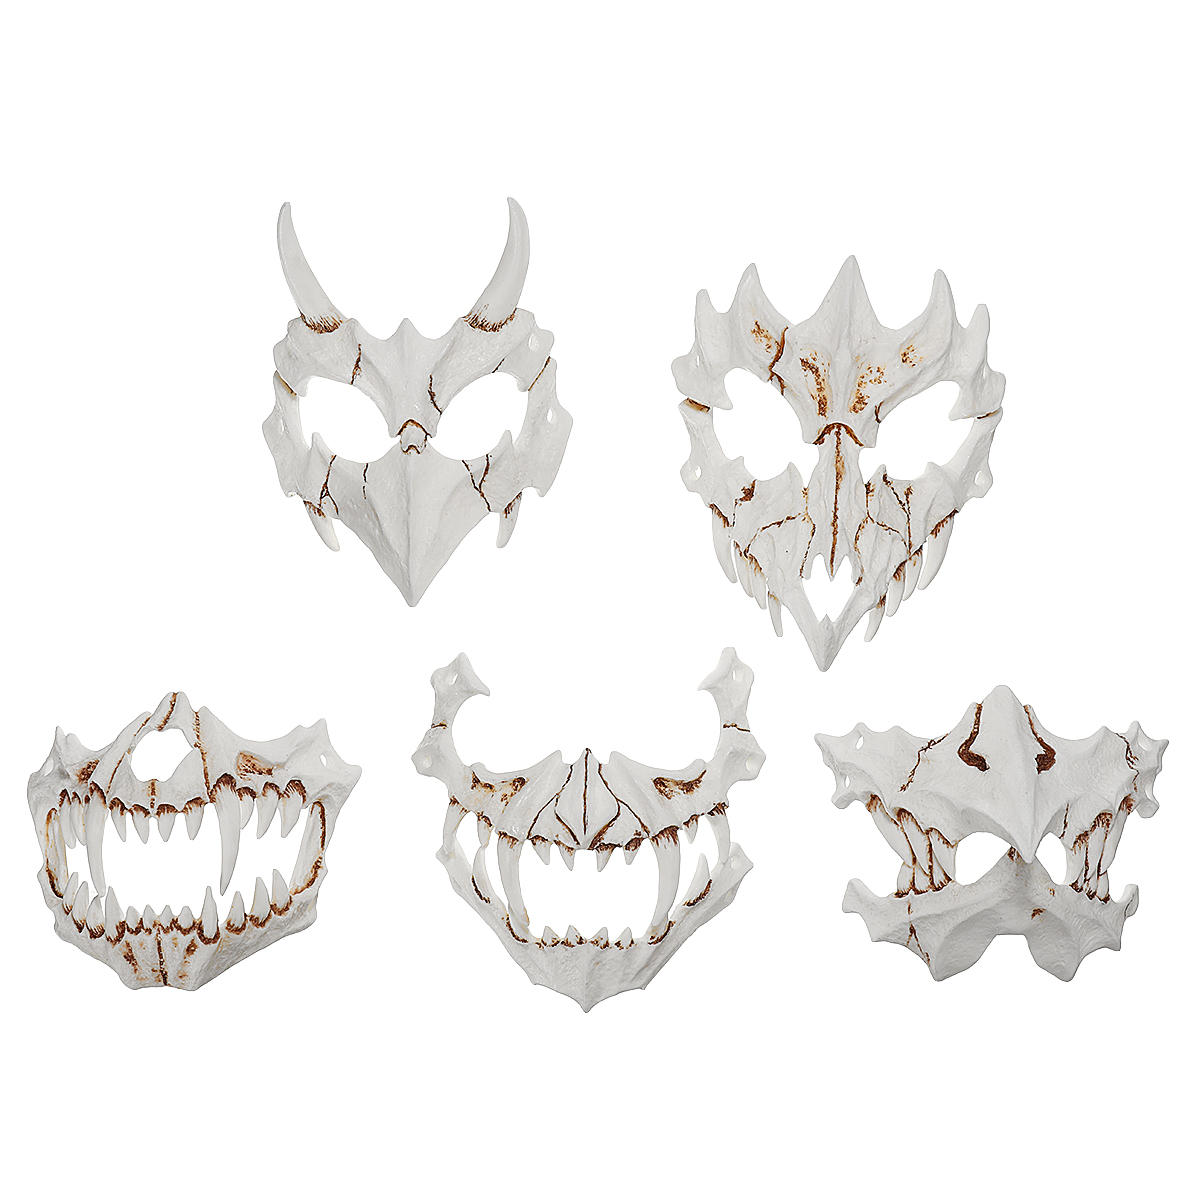 Halloween Resin Mask Animal Theme Party Face Skull Mask Kostuum Cosplay Party